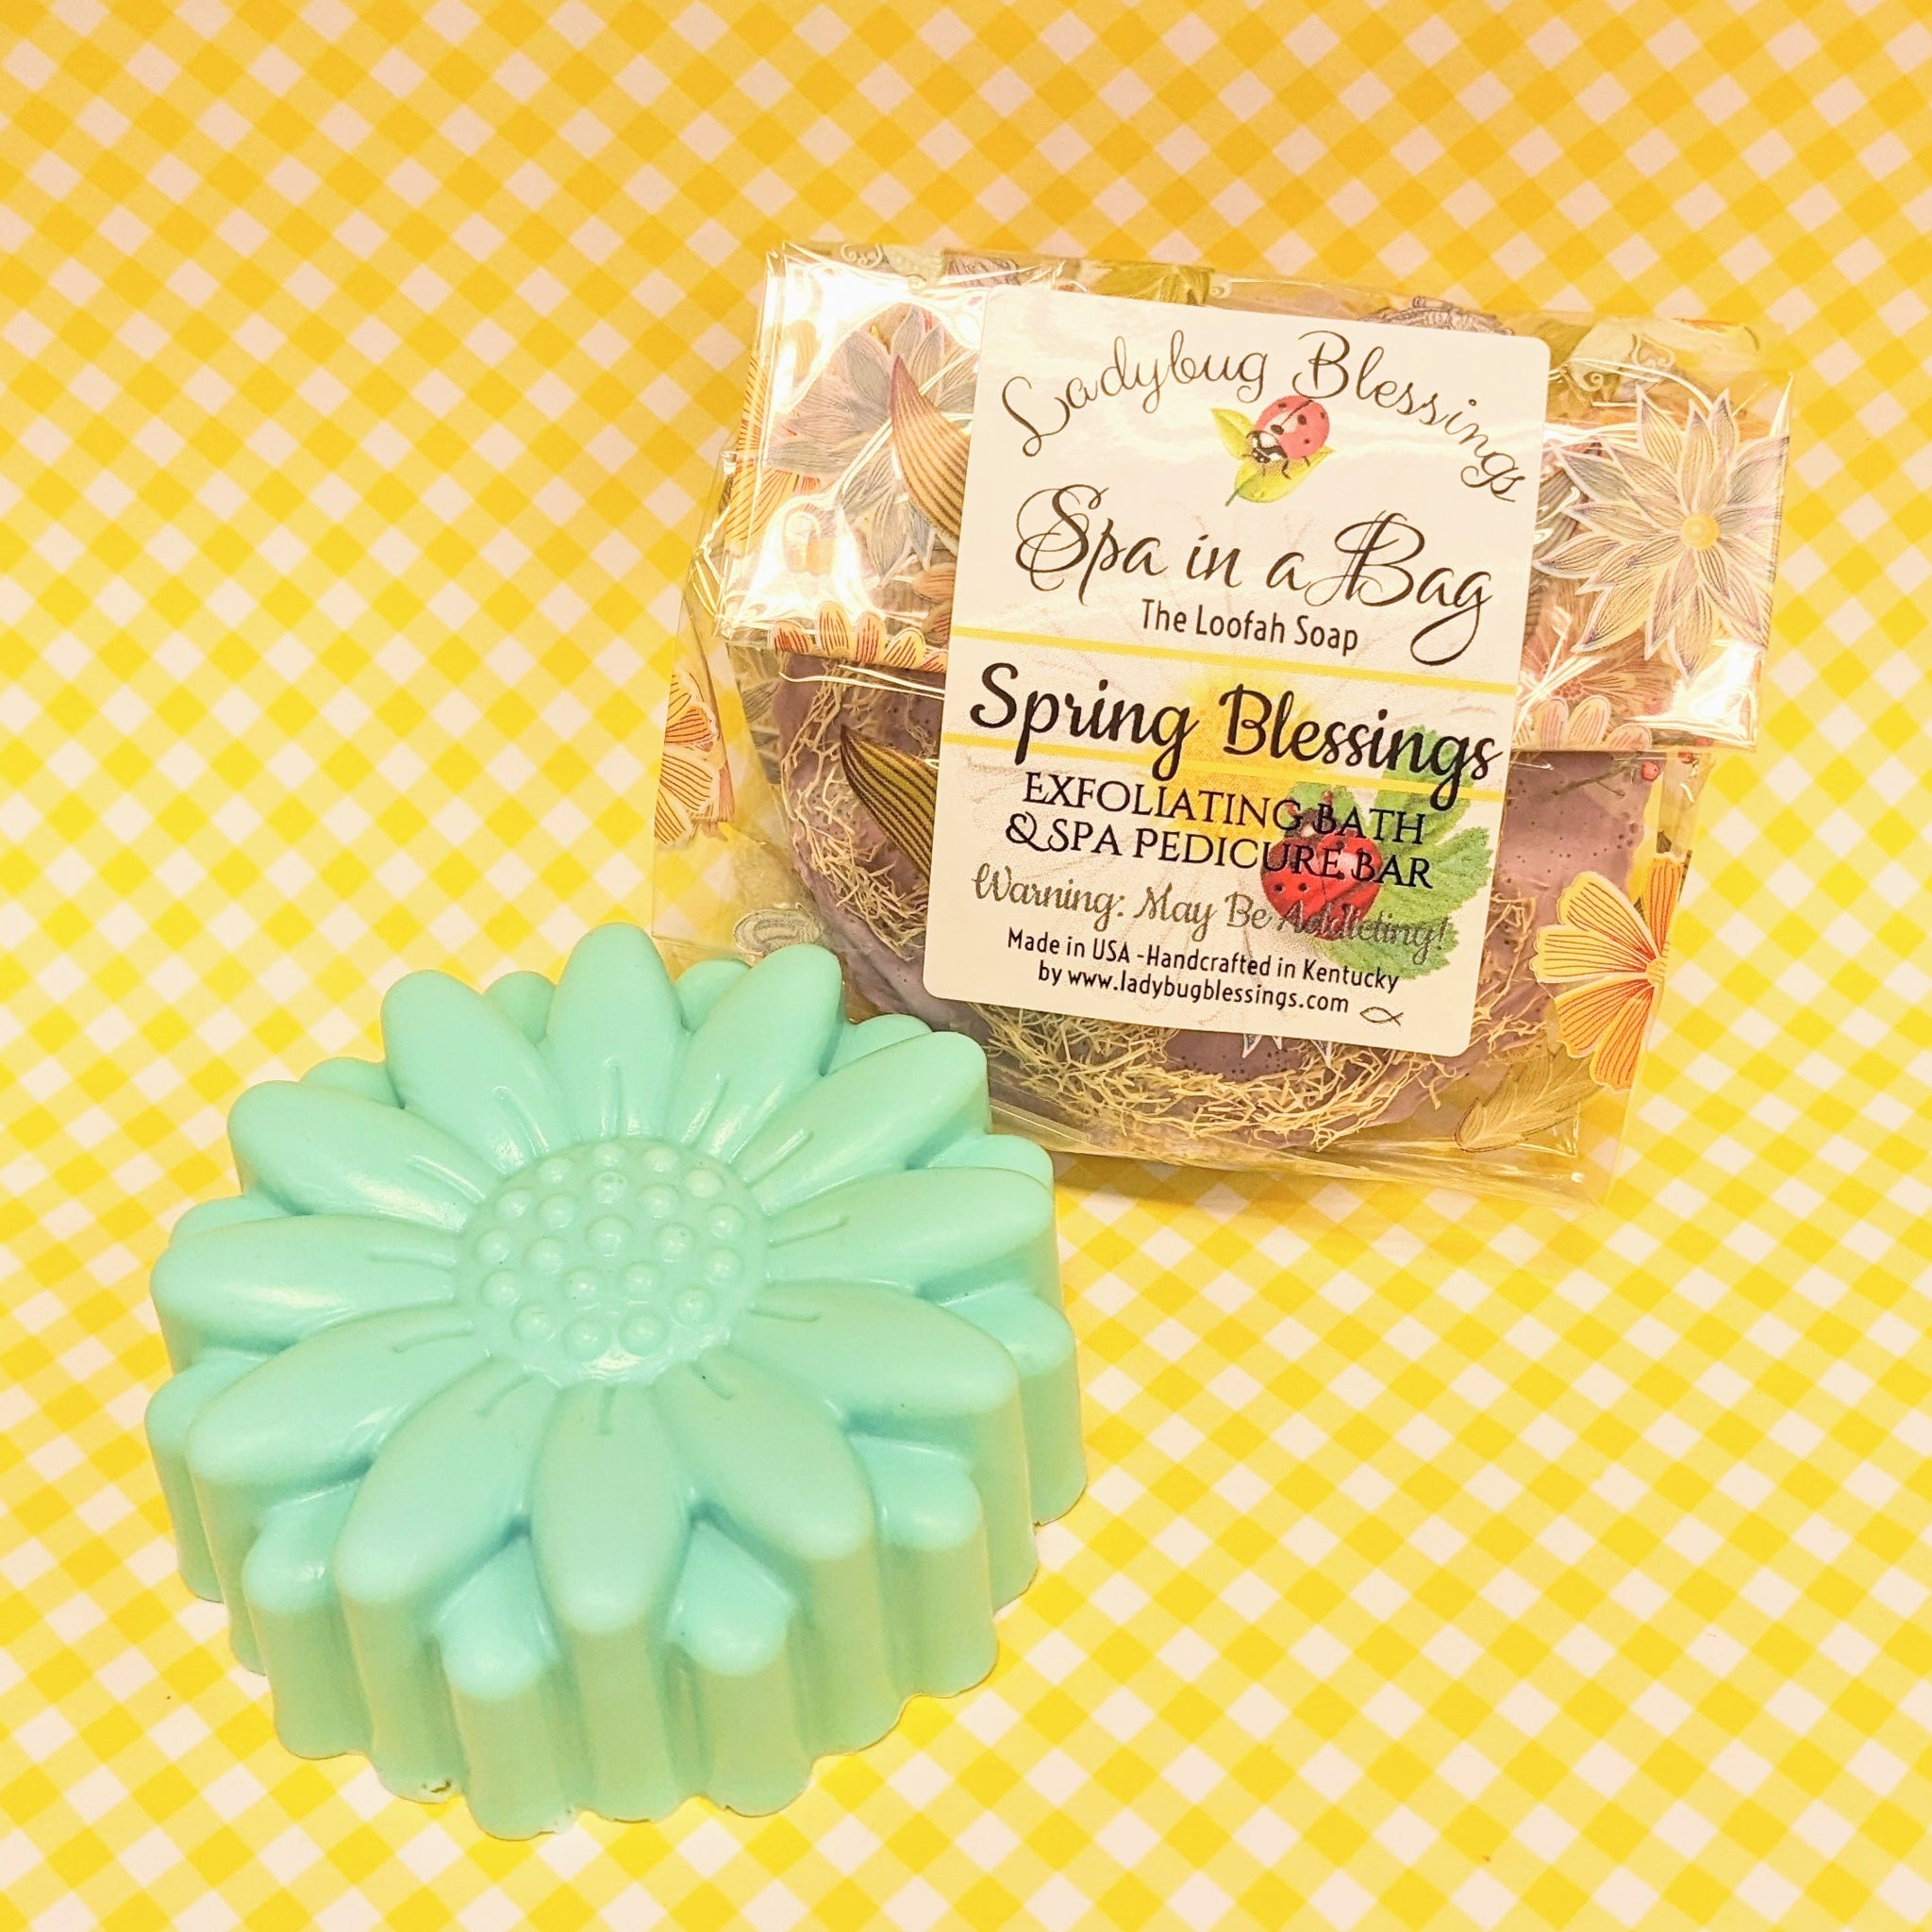 Spring Blessings! Shea Butter Flower Loofah Soap